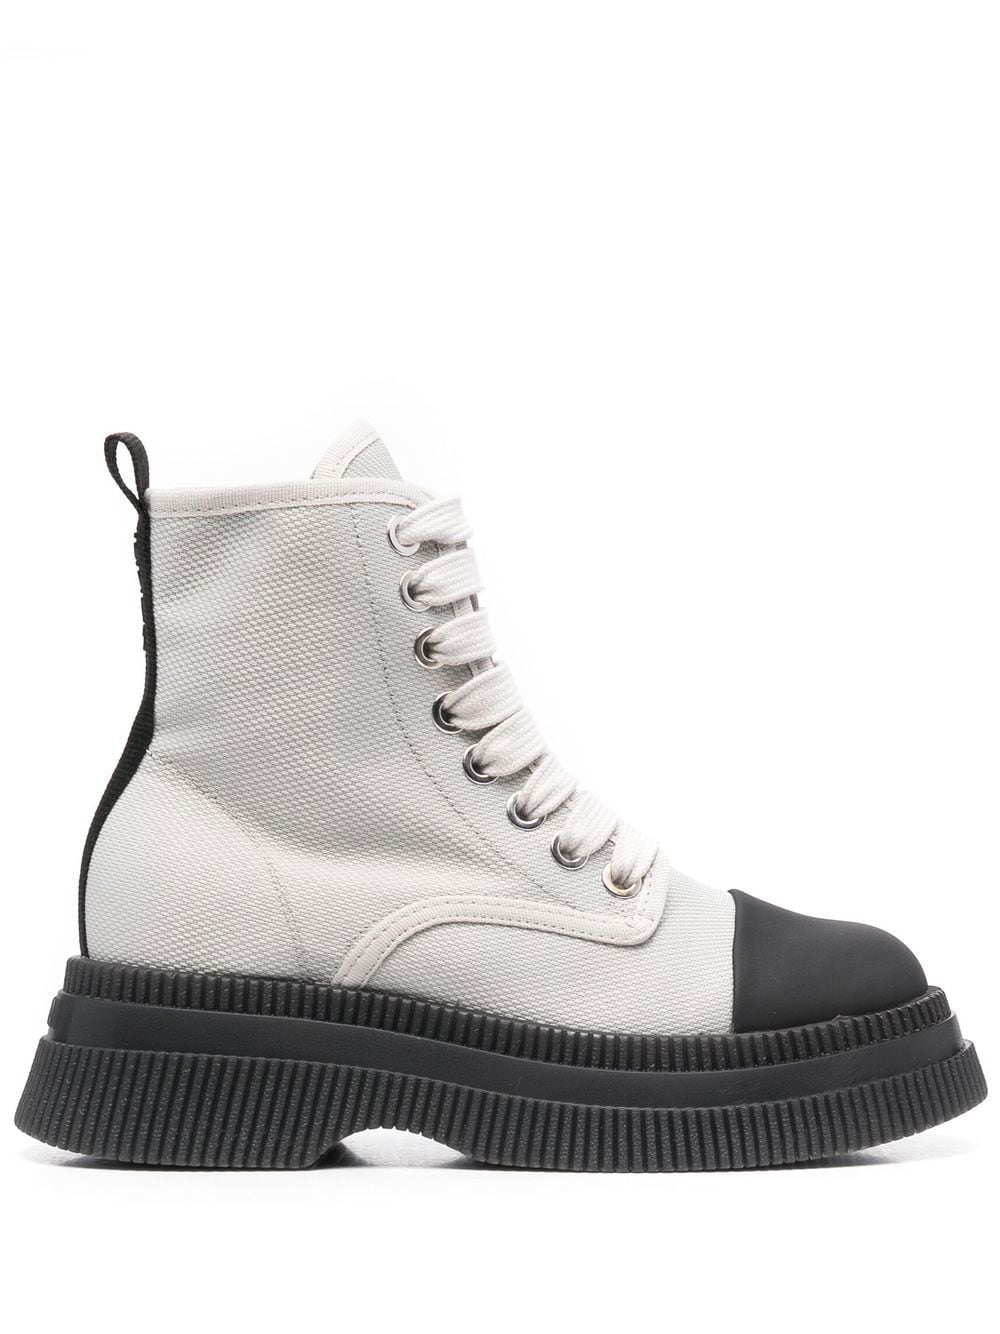 Creepers lace-up ankle boots